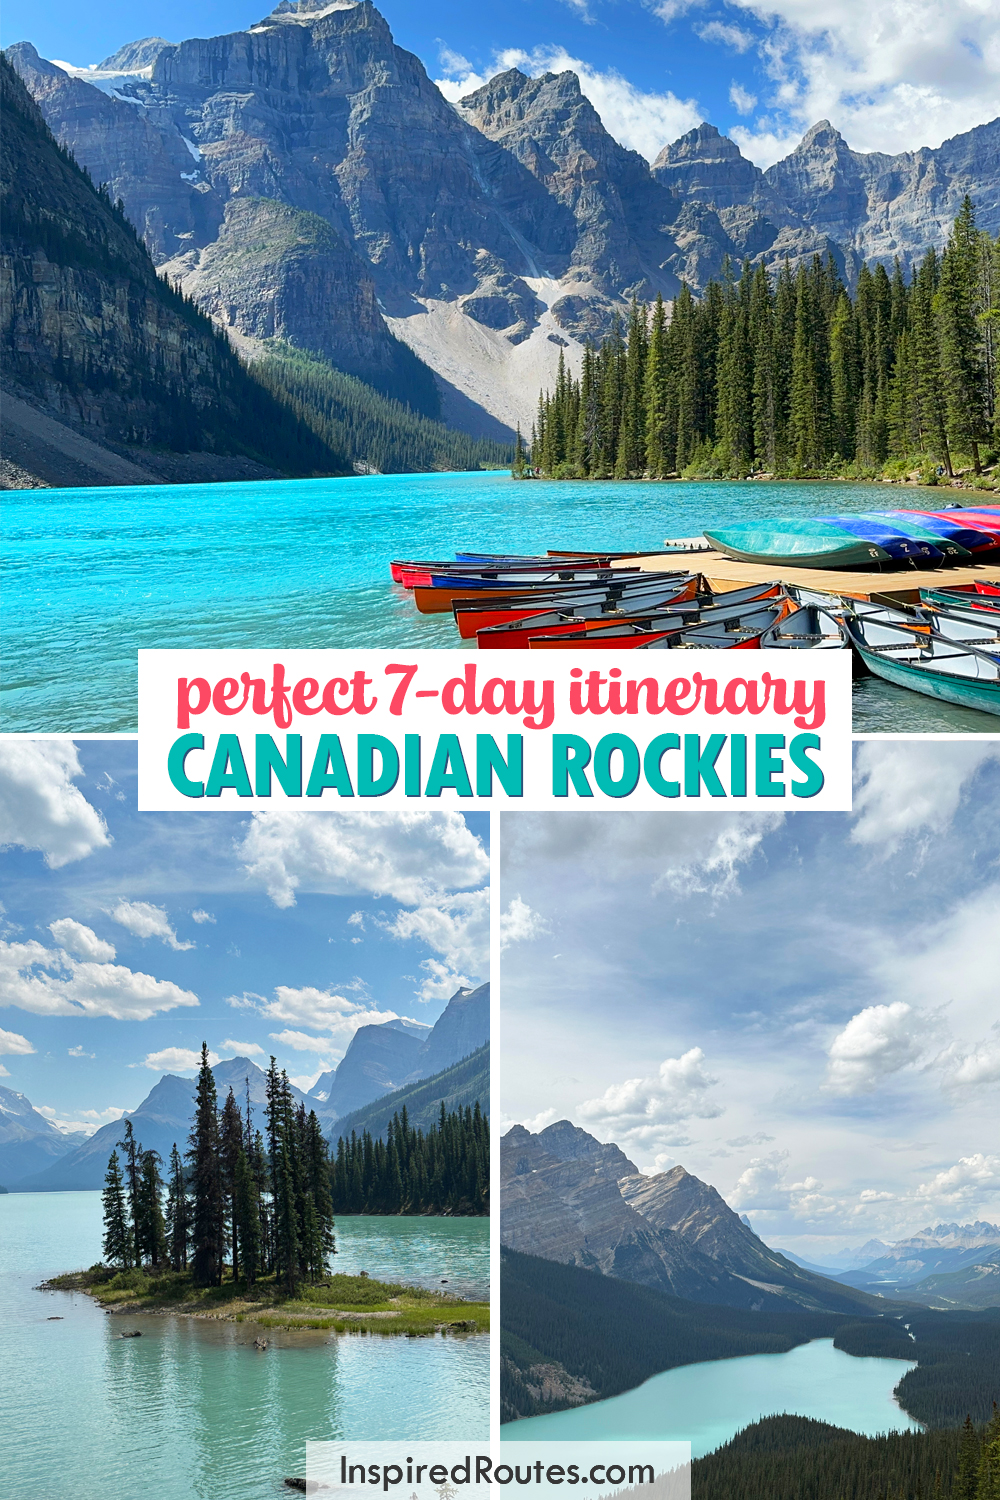 three mountain lake photo with text that reads perfect 7-day itinerary Canadian Rockies